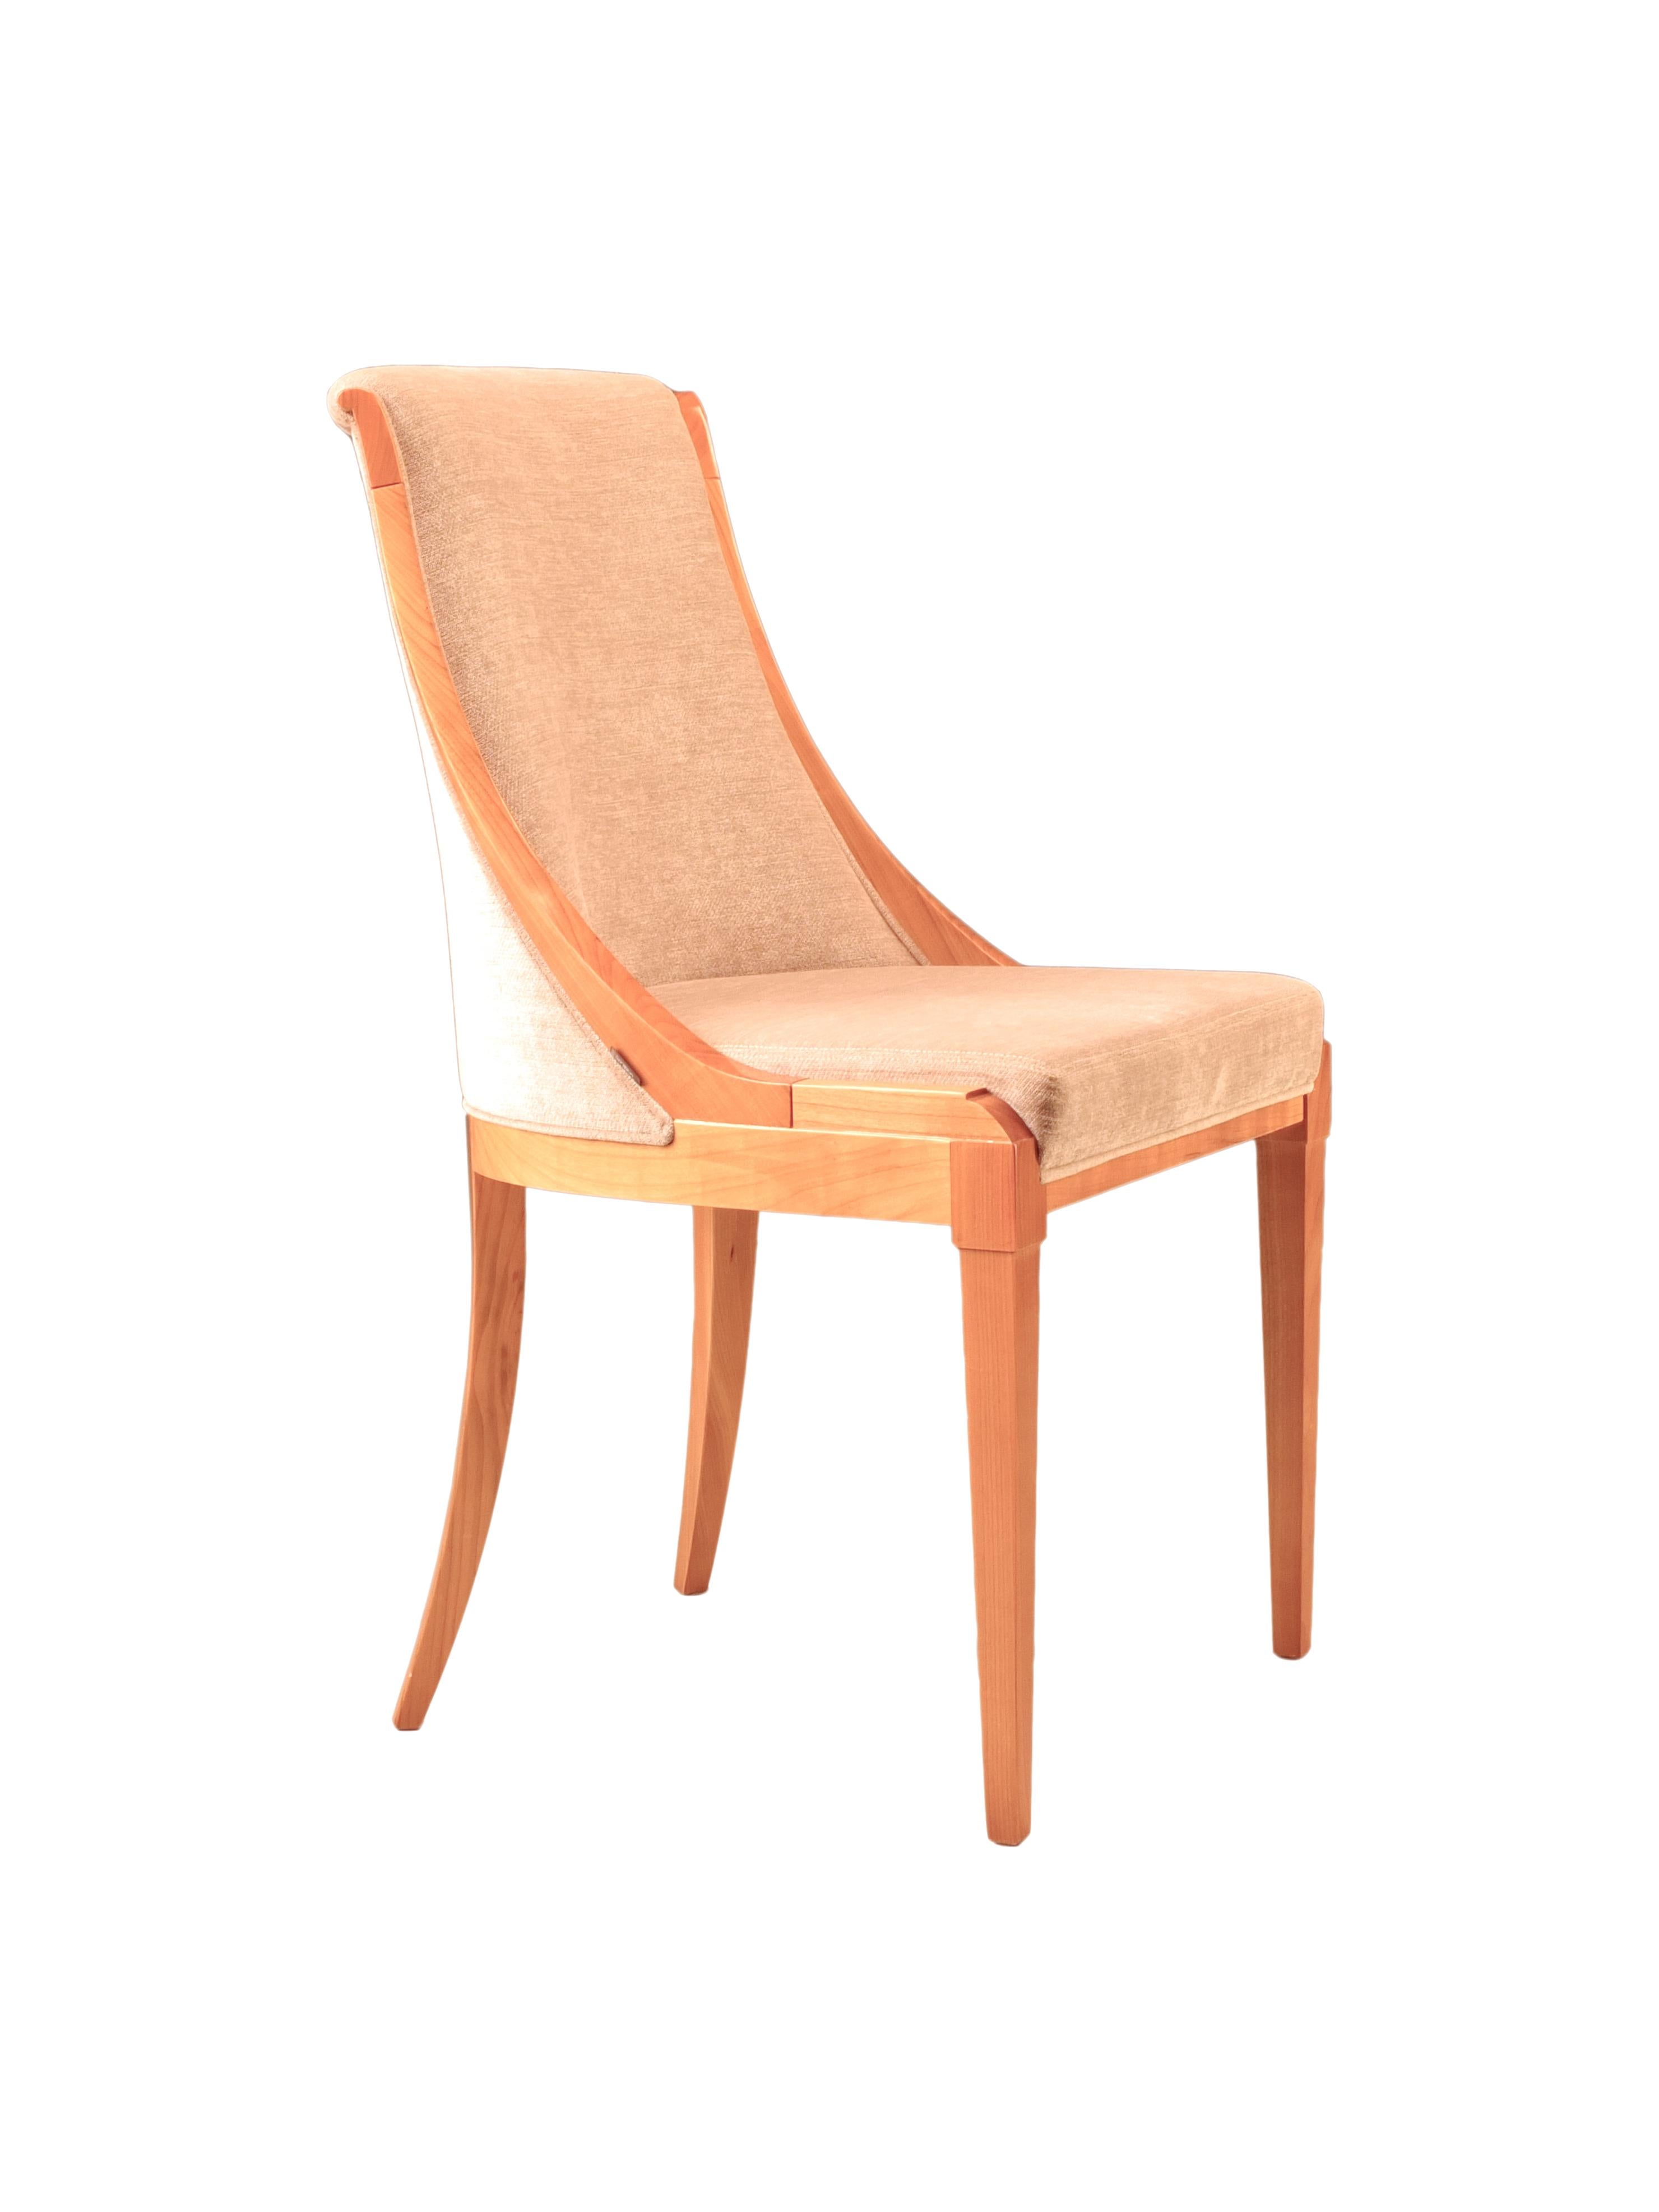 Contemporary Musa, Capitonè Upholstered Chair Made of Cherrywood